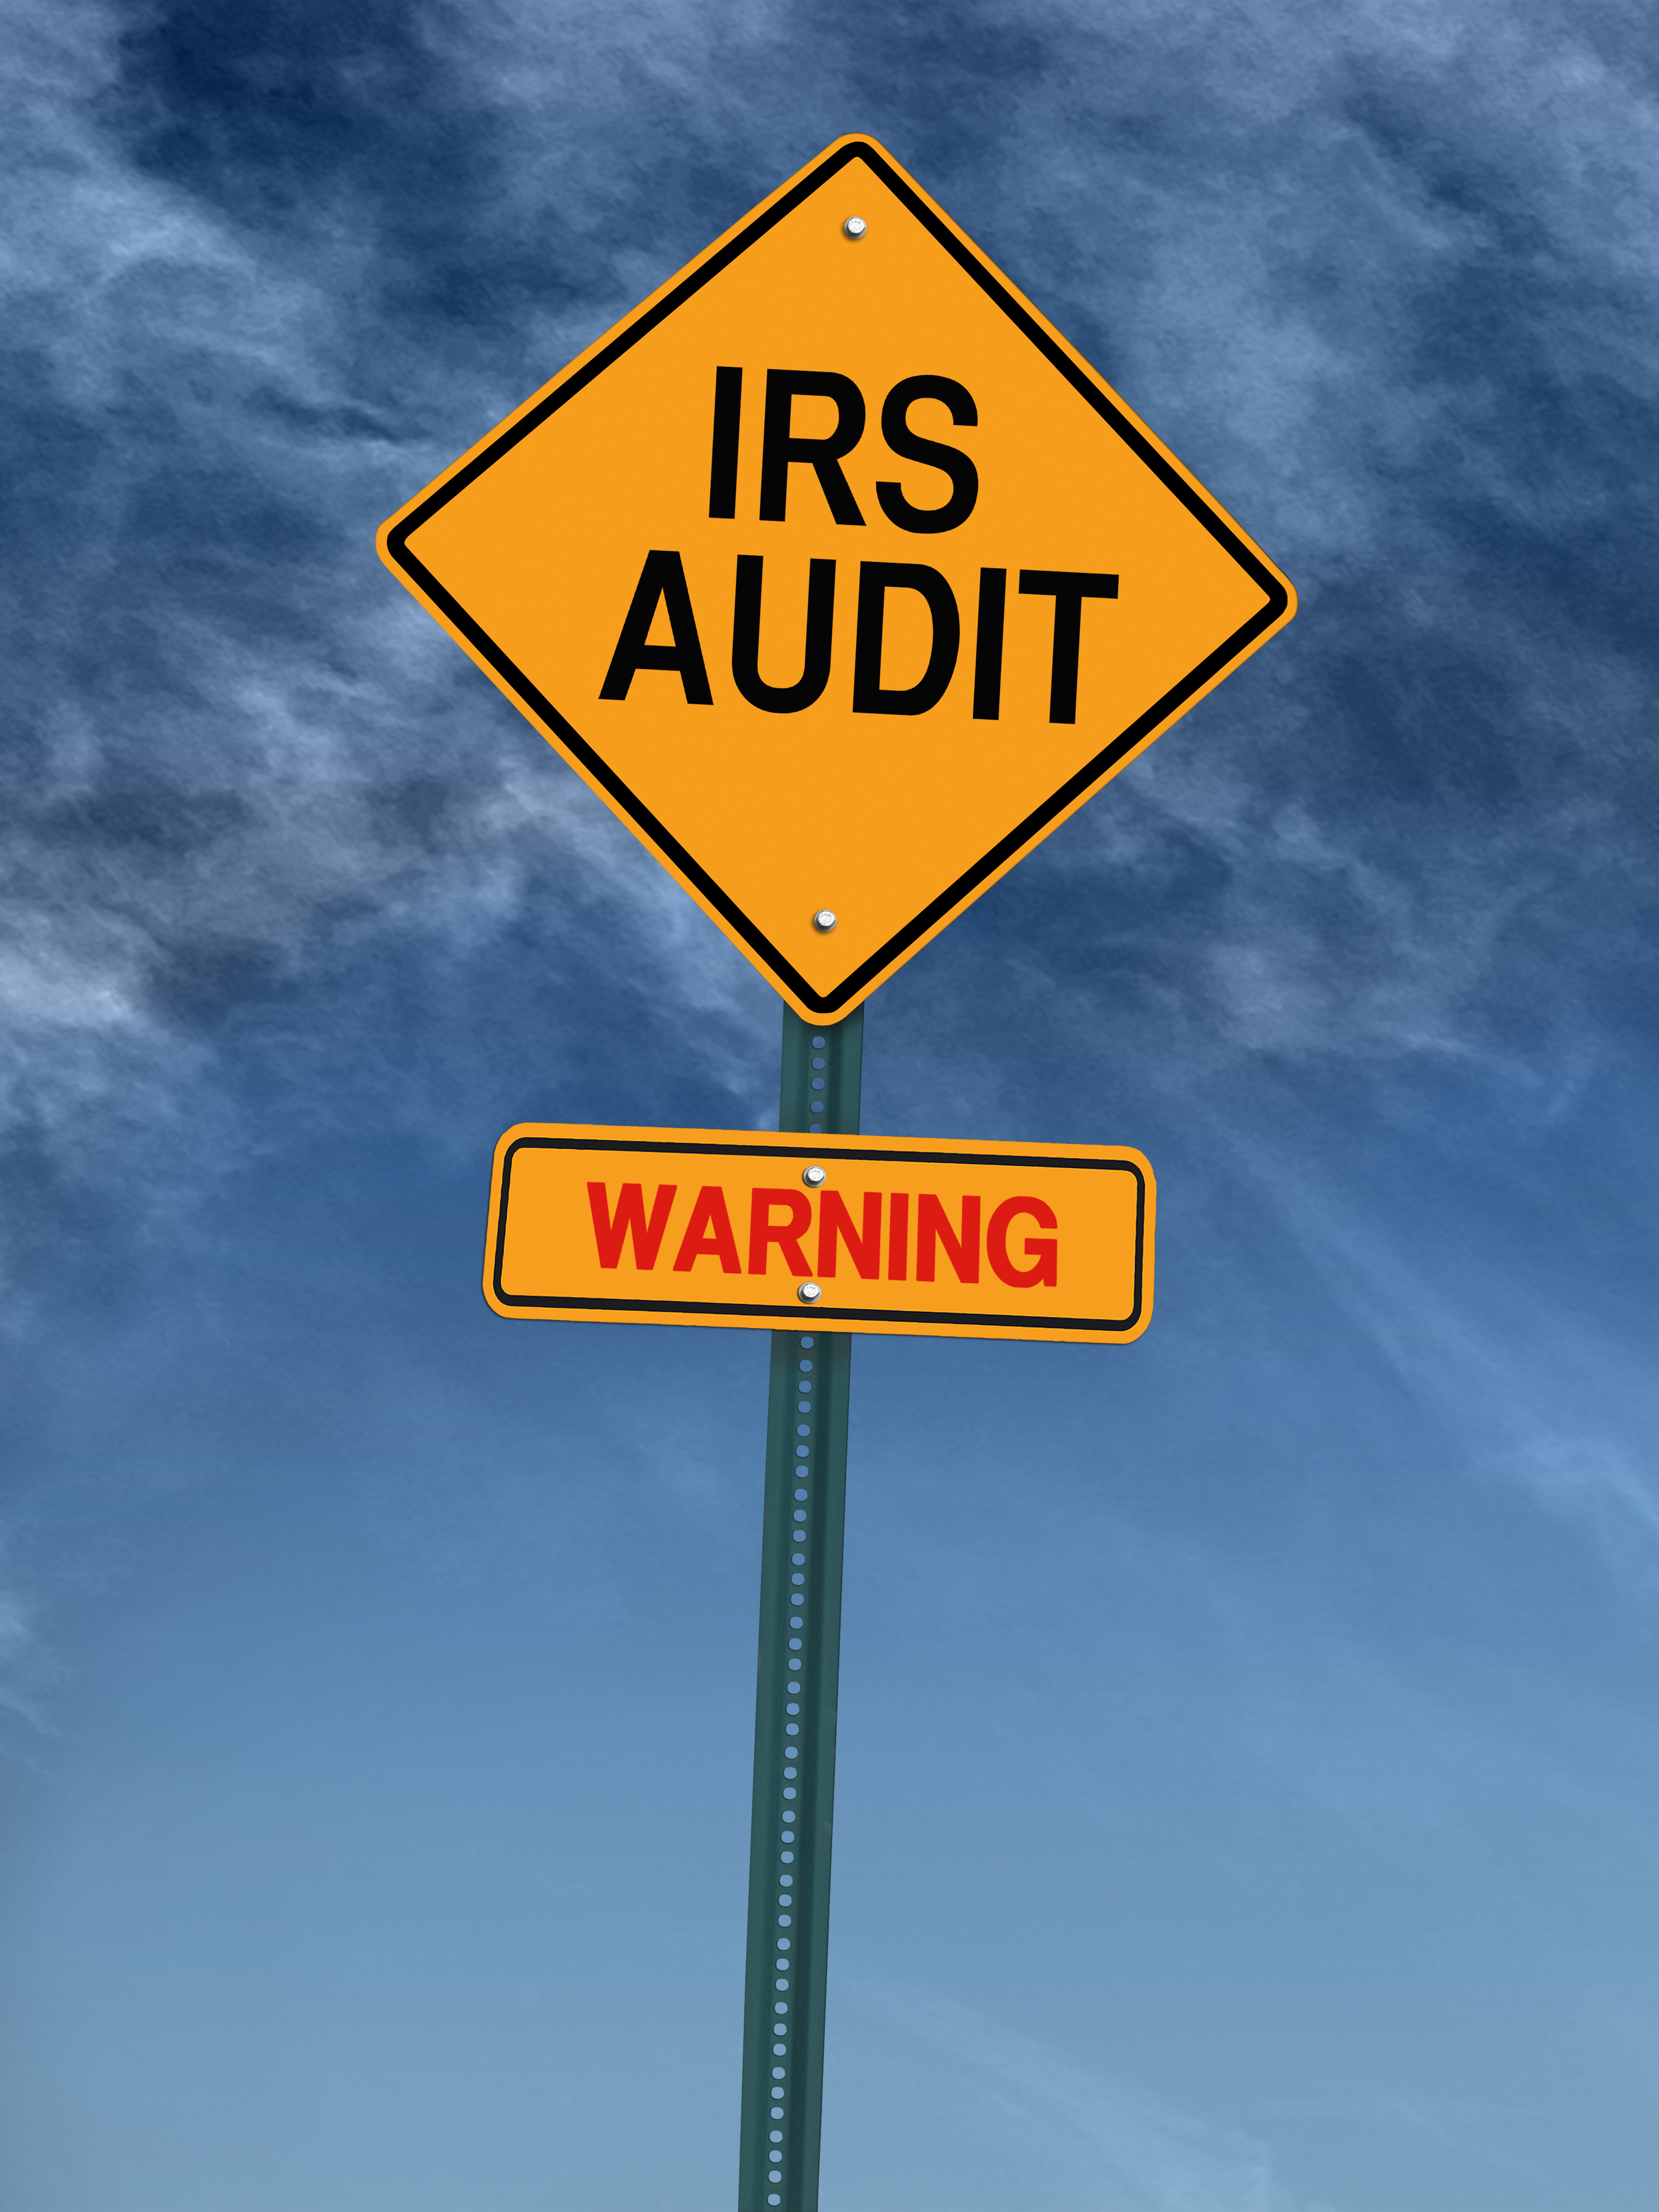 Receiving a failed IRS audit can have a devastating outcome on your medical practice. Here's what you need to know in order to avoid this from happening.